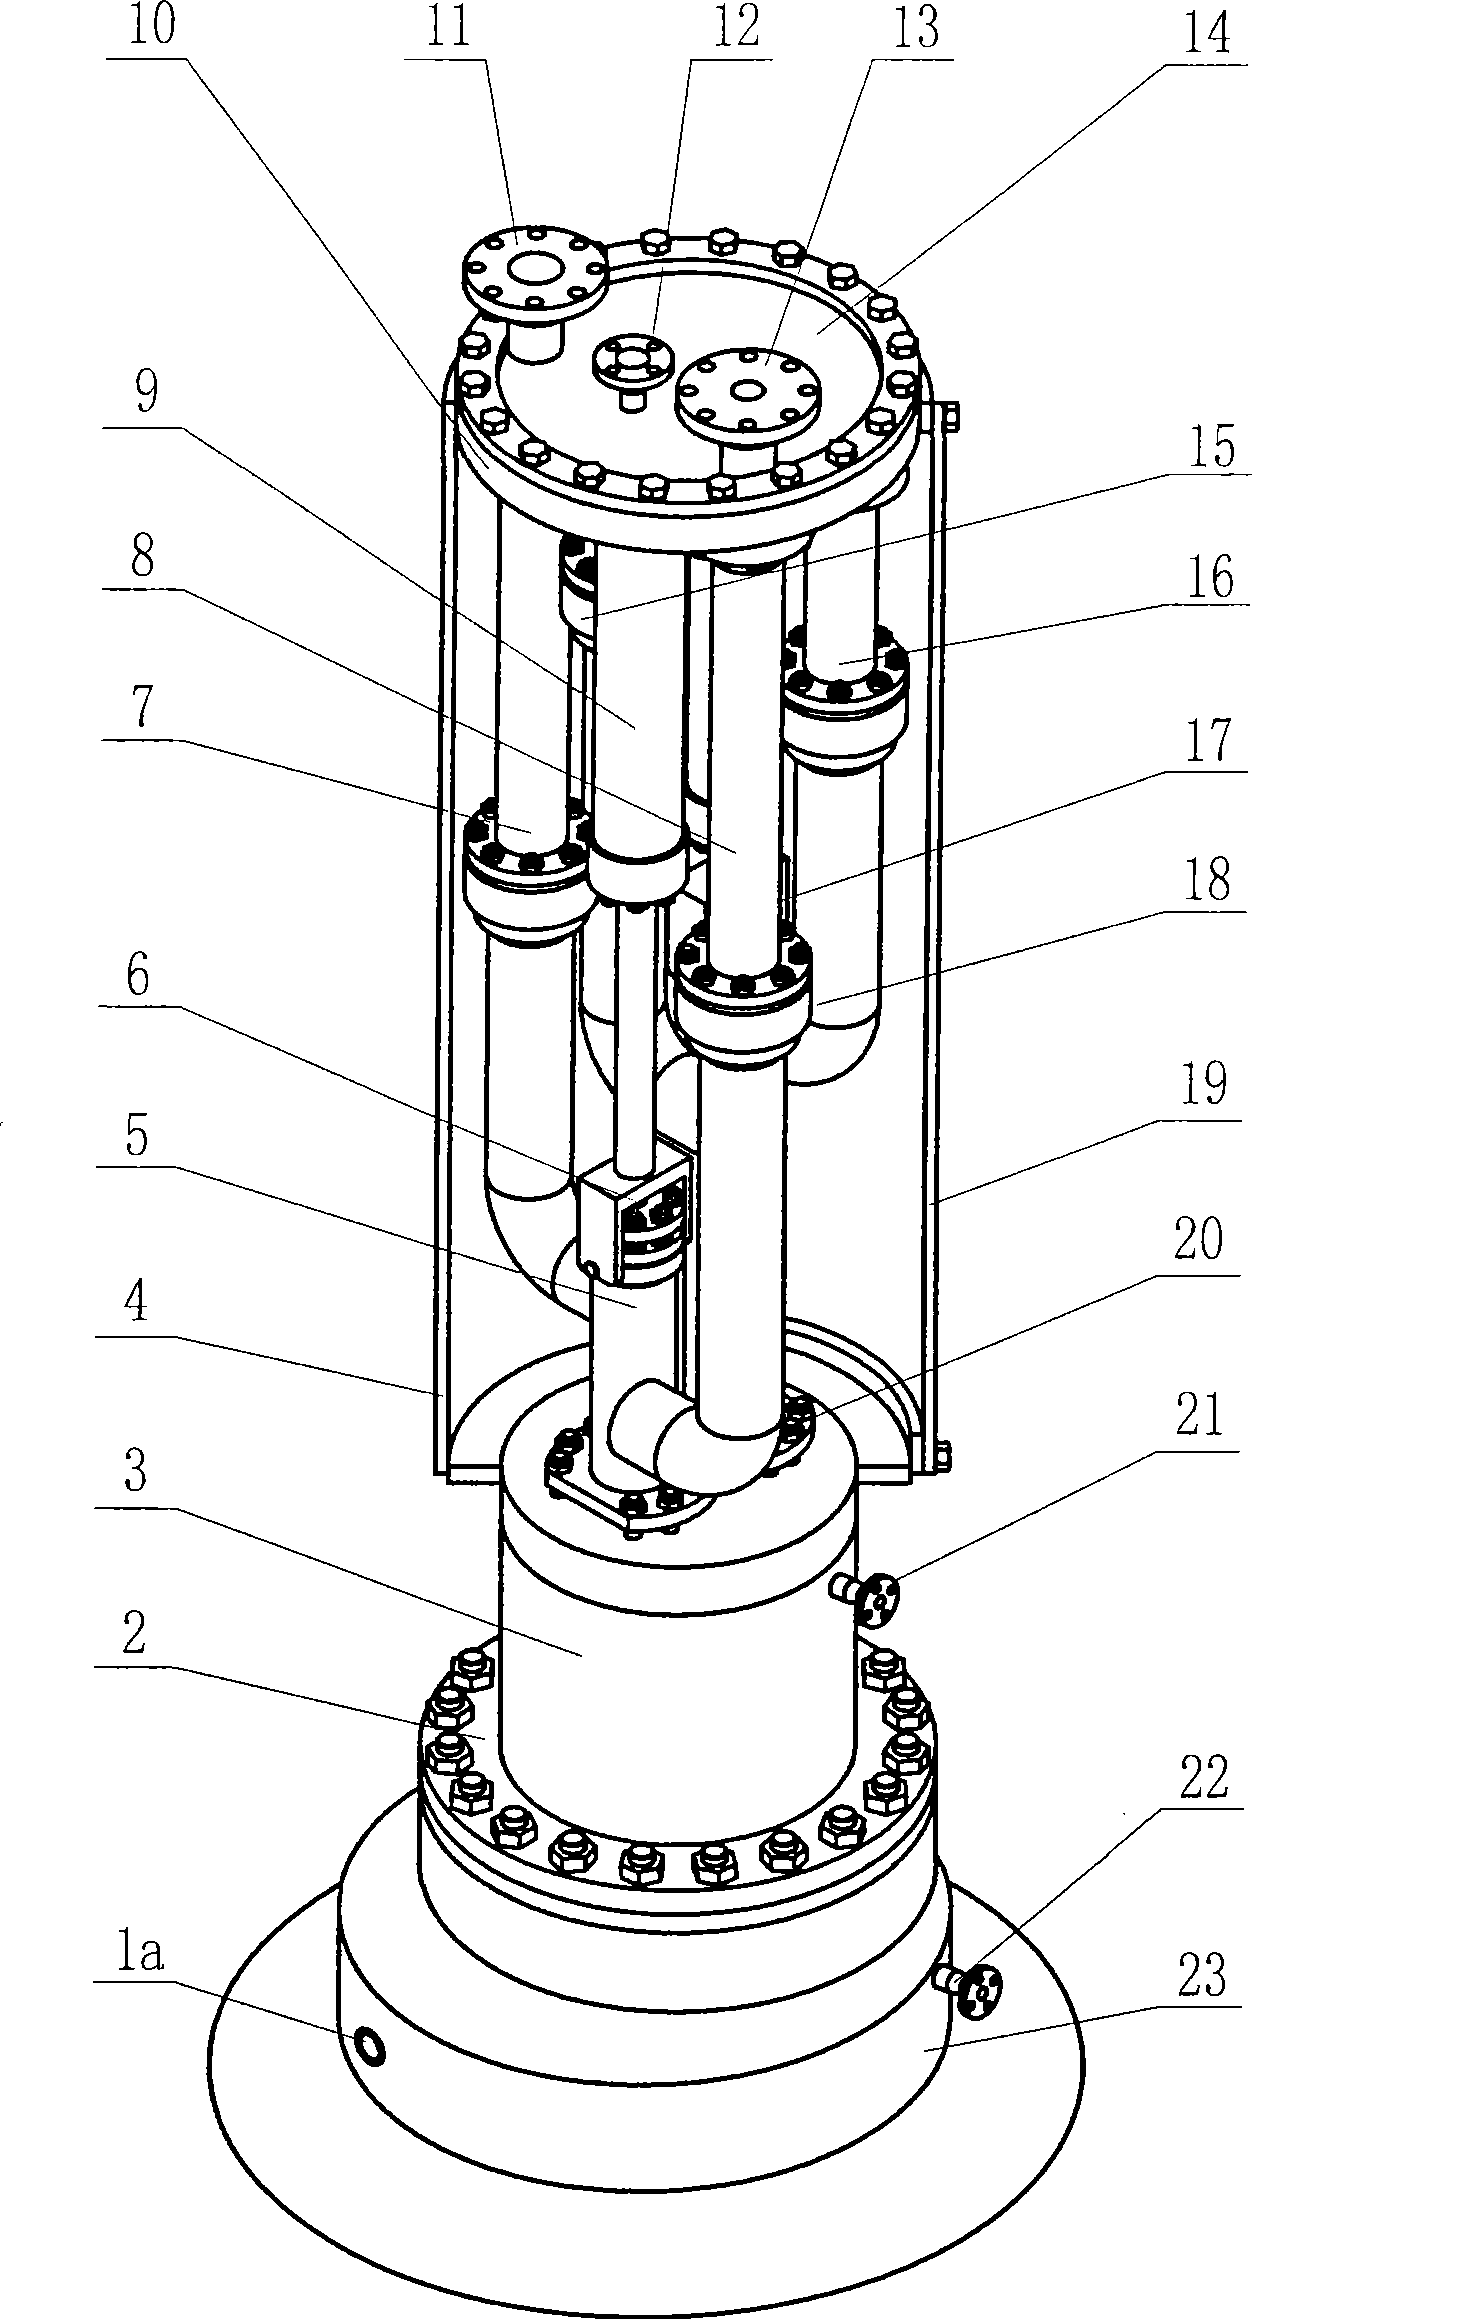 Method and apparatus for exchanging nozzle on line